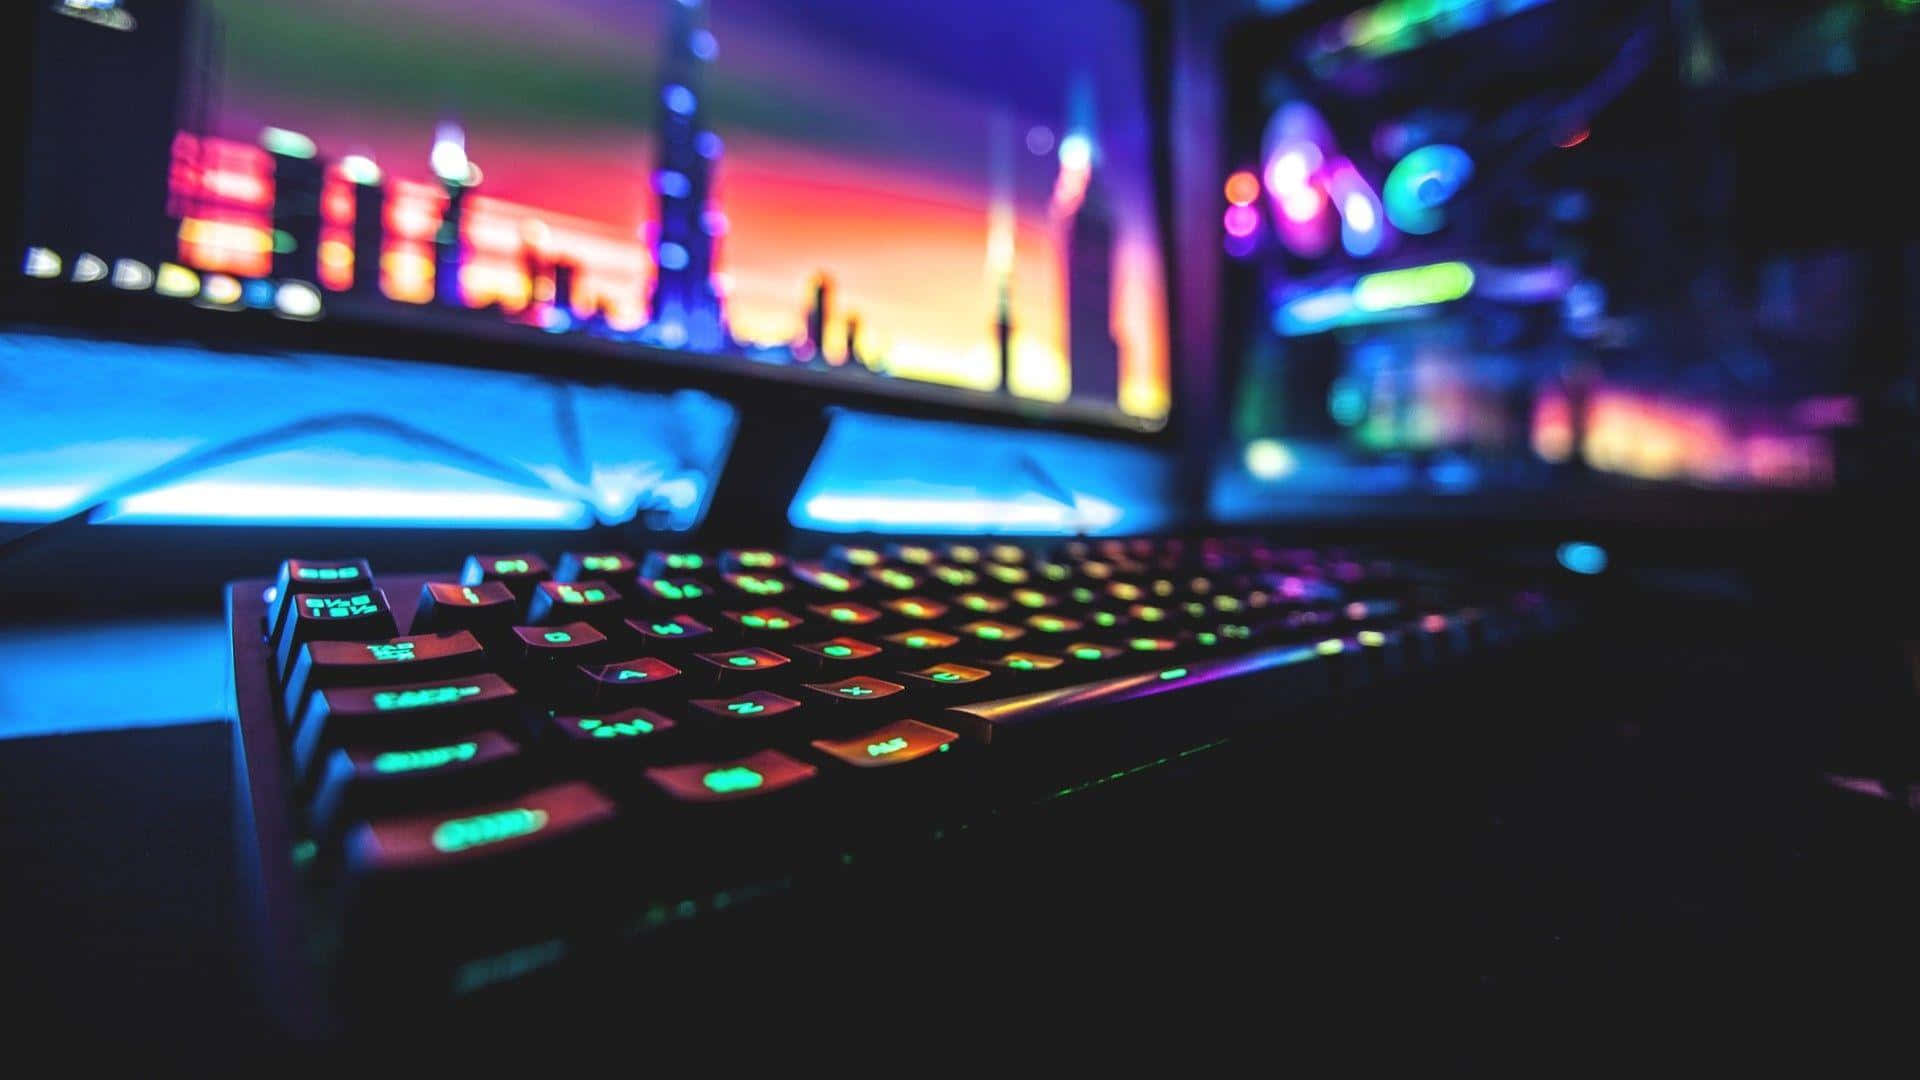 A Computer Keyboard With Colorful Lights In Front Of A Monitor